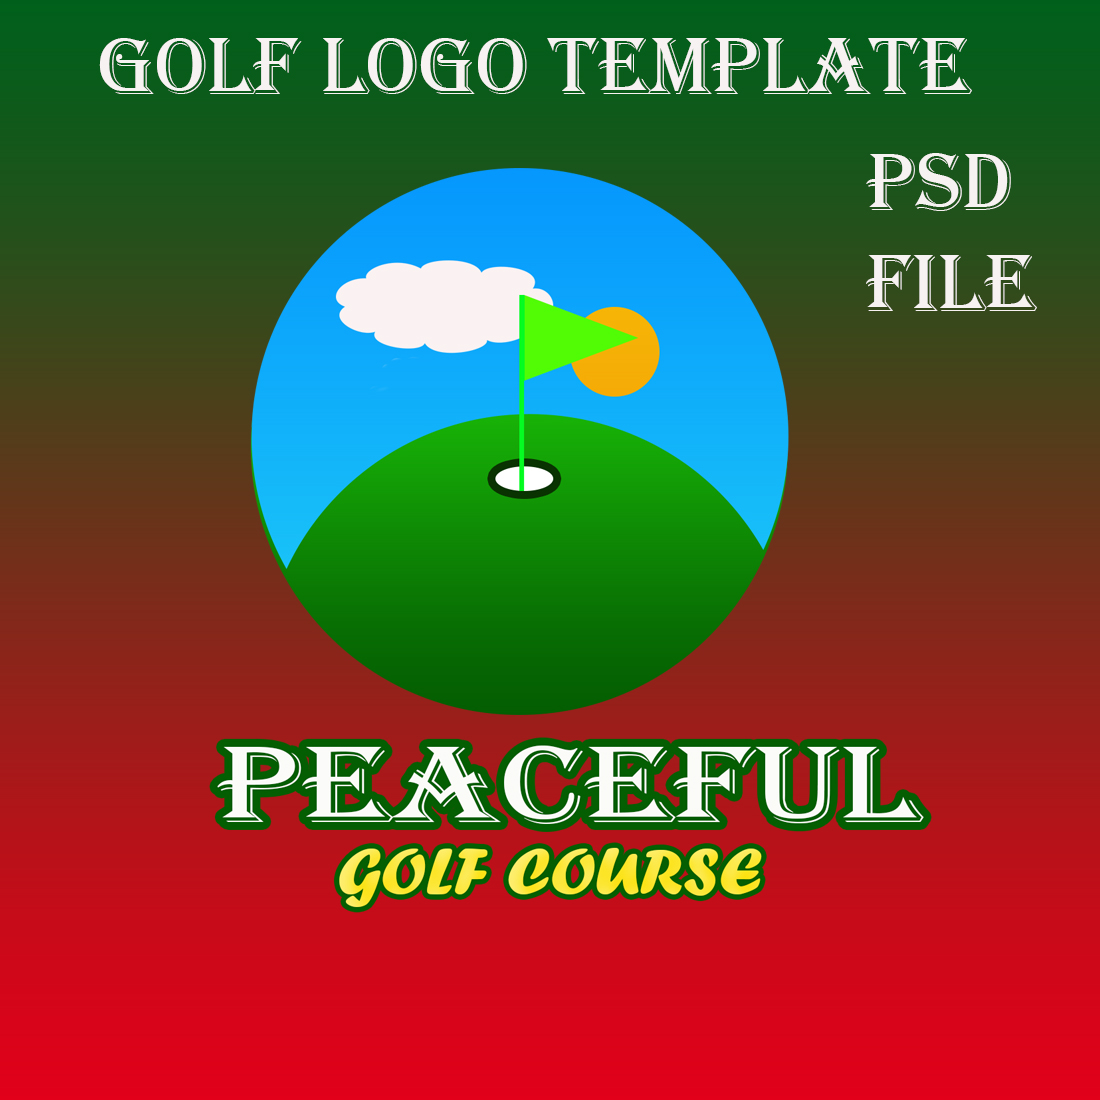 Peaceful Golf Logo Template cover image.